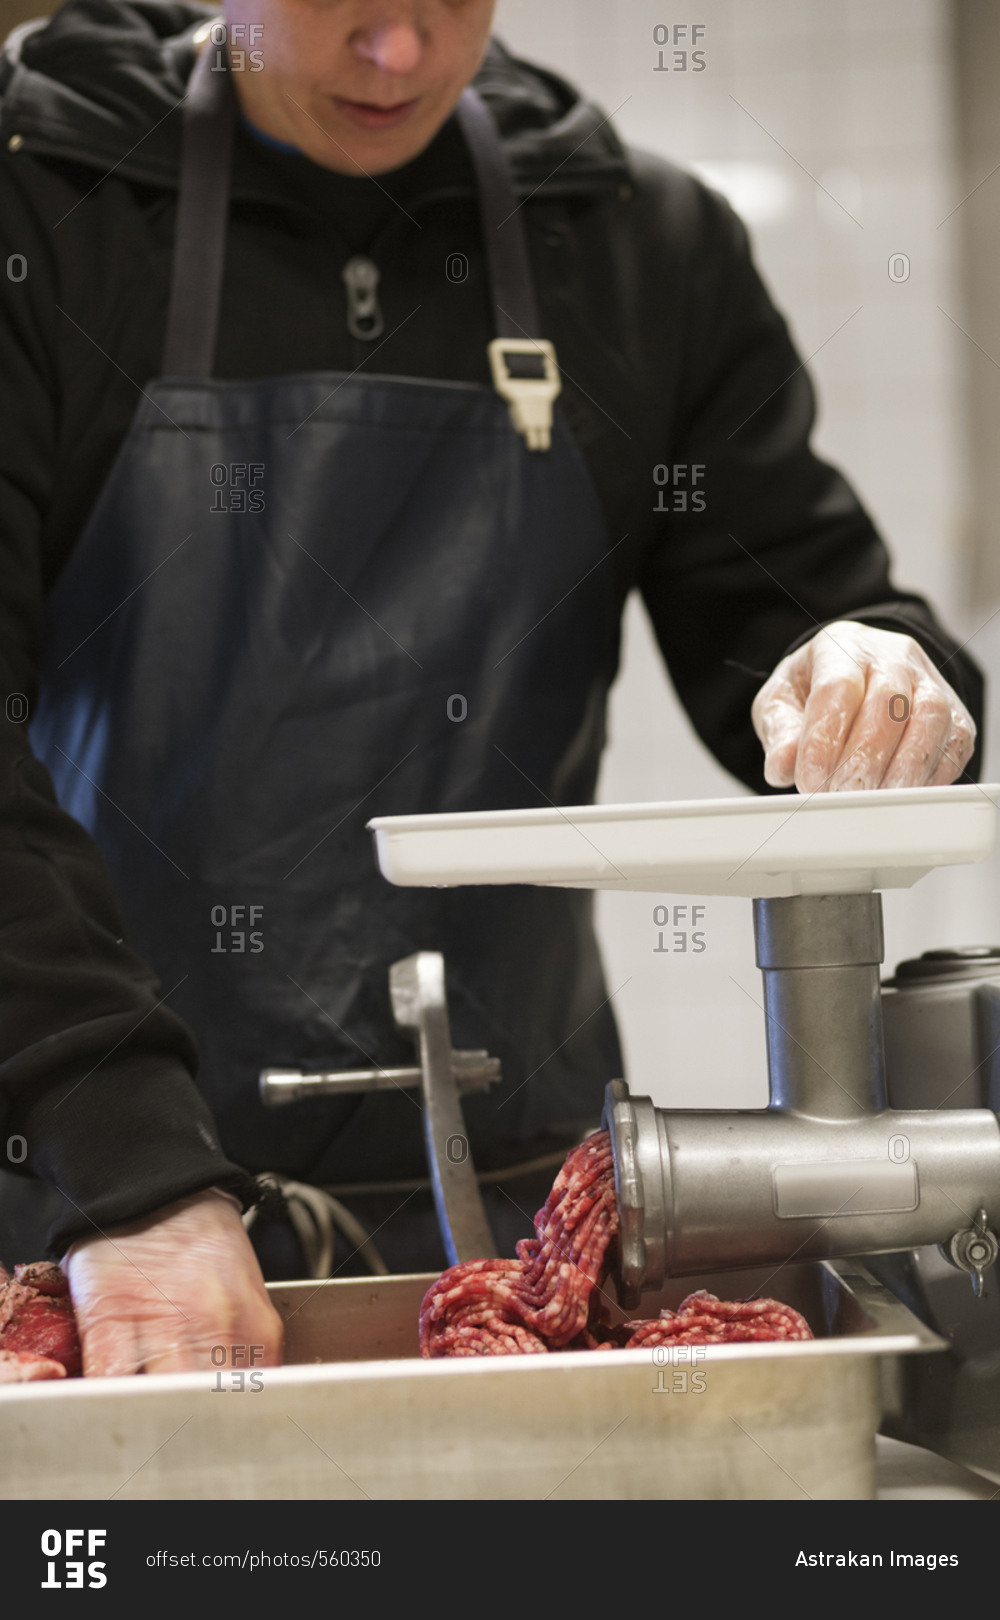 Mid section of man grinding meat to make pork sausages